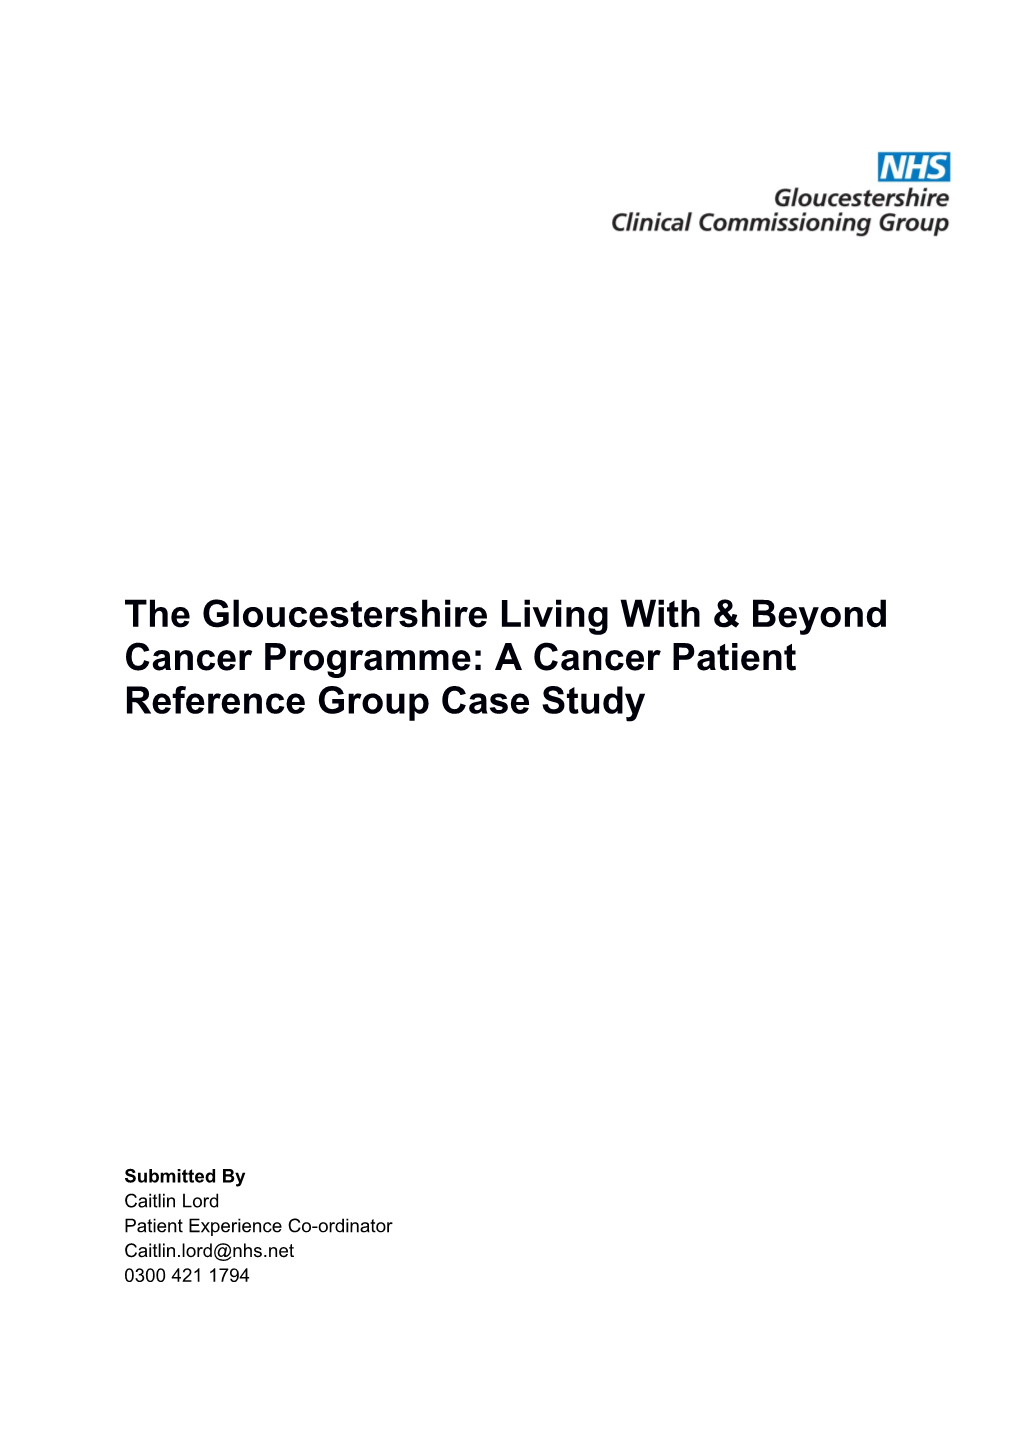 The Gloucestershire Living with & Beyond Cancer Programme: a Cancer Patient Reference